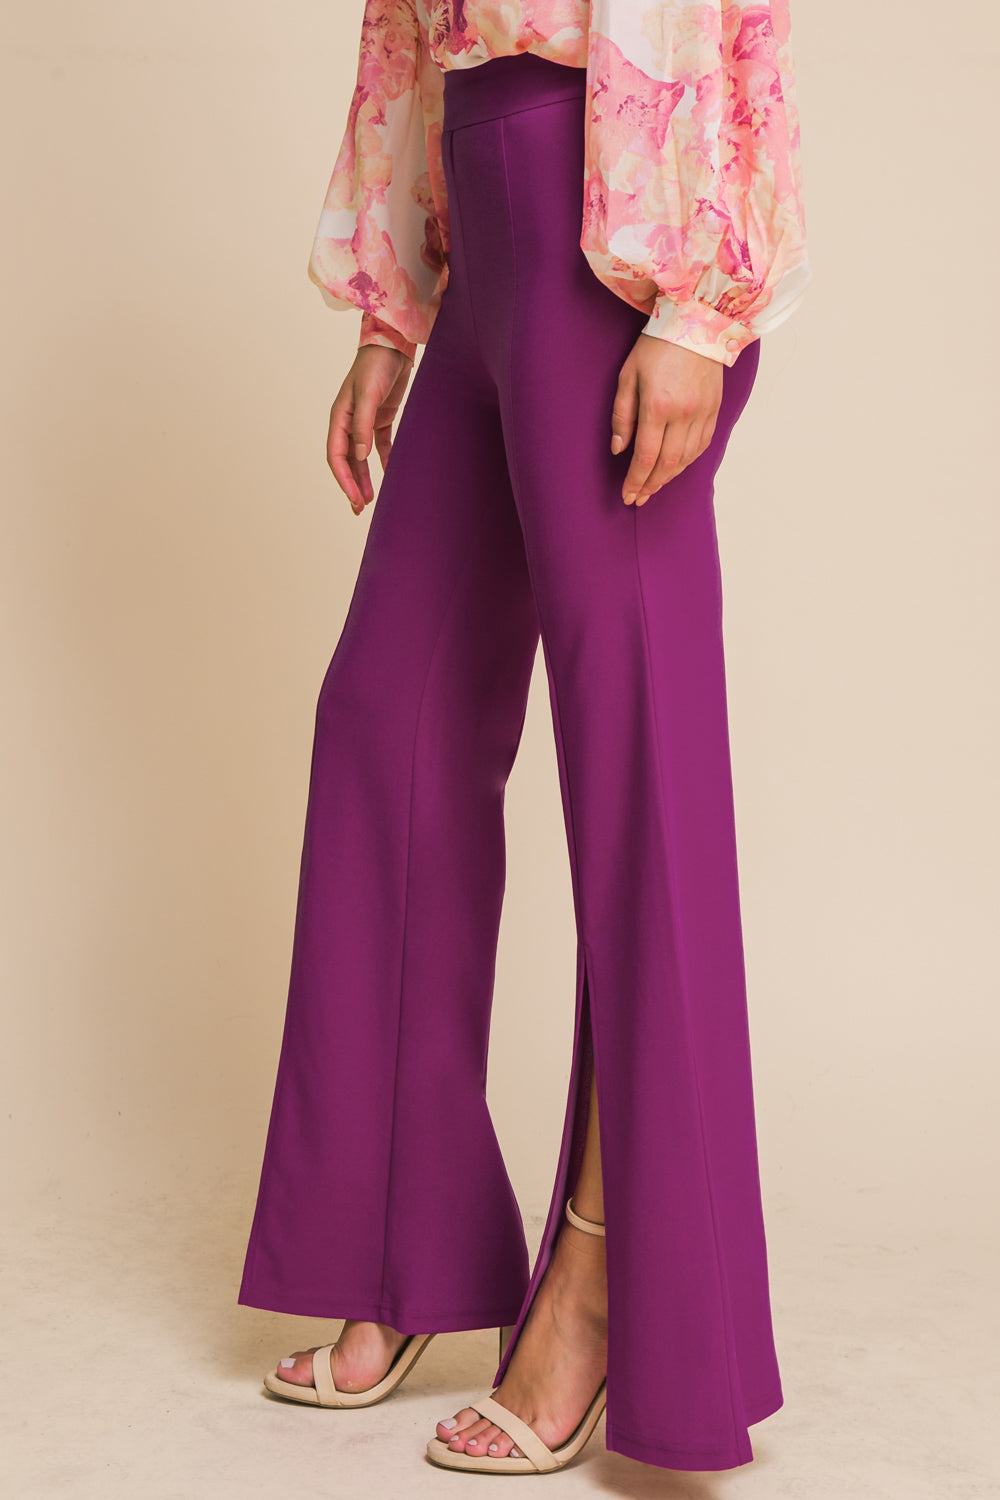 HEY DARLING WOVEN FLARE PANTS